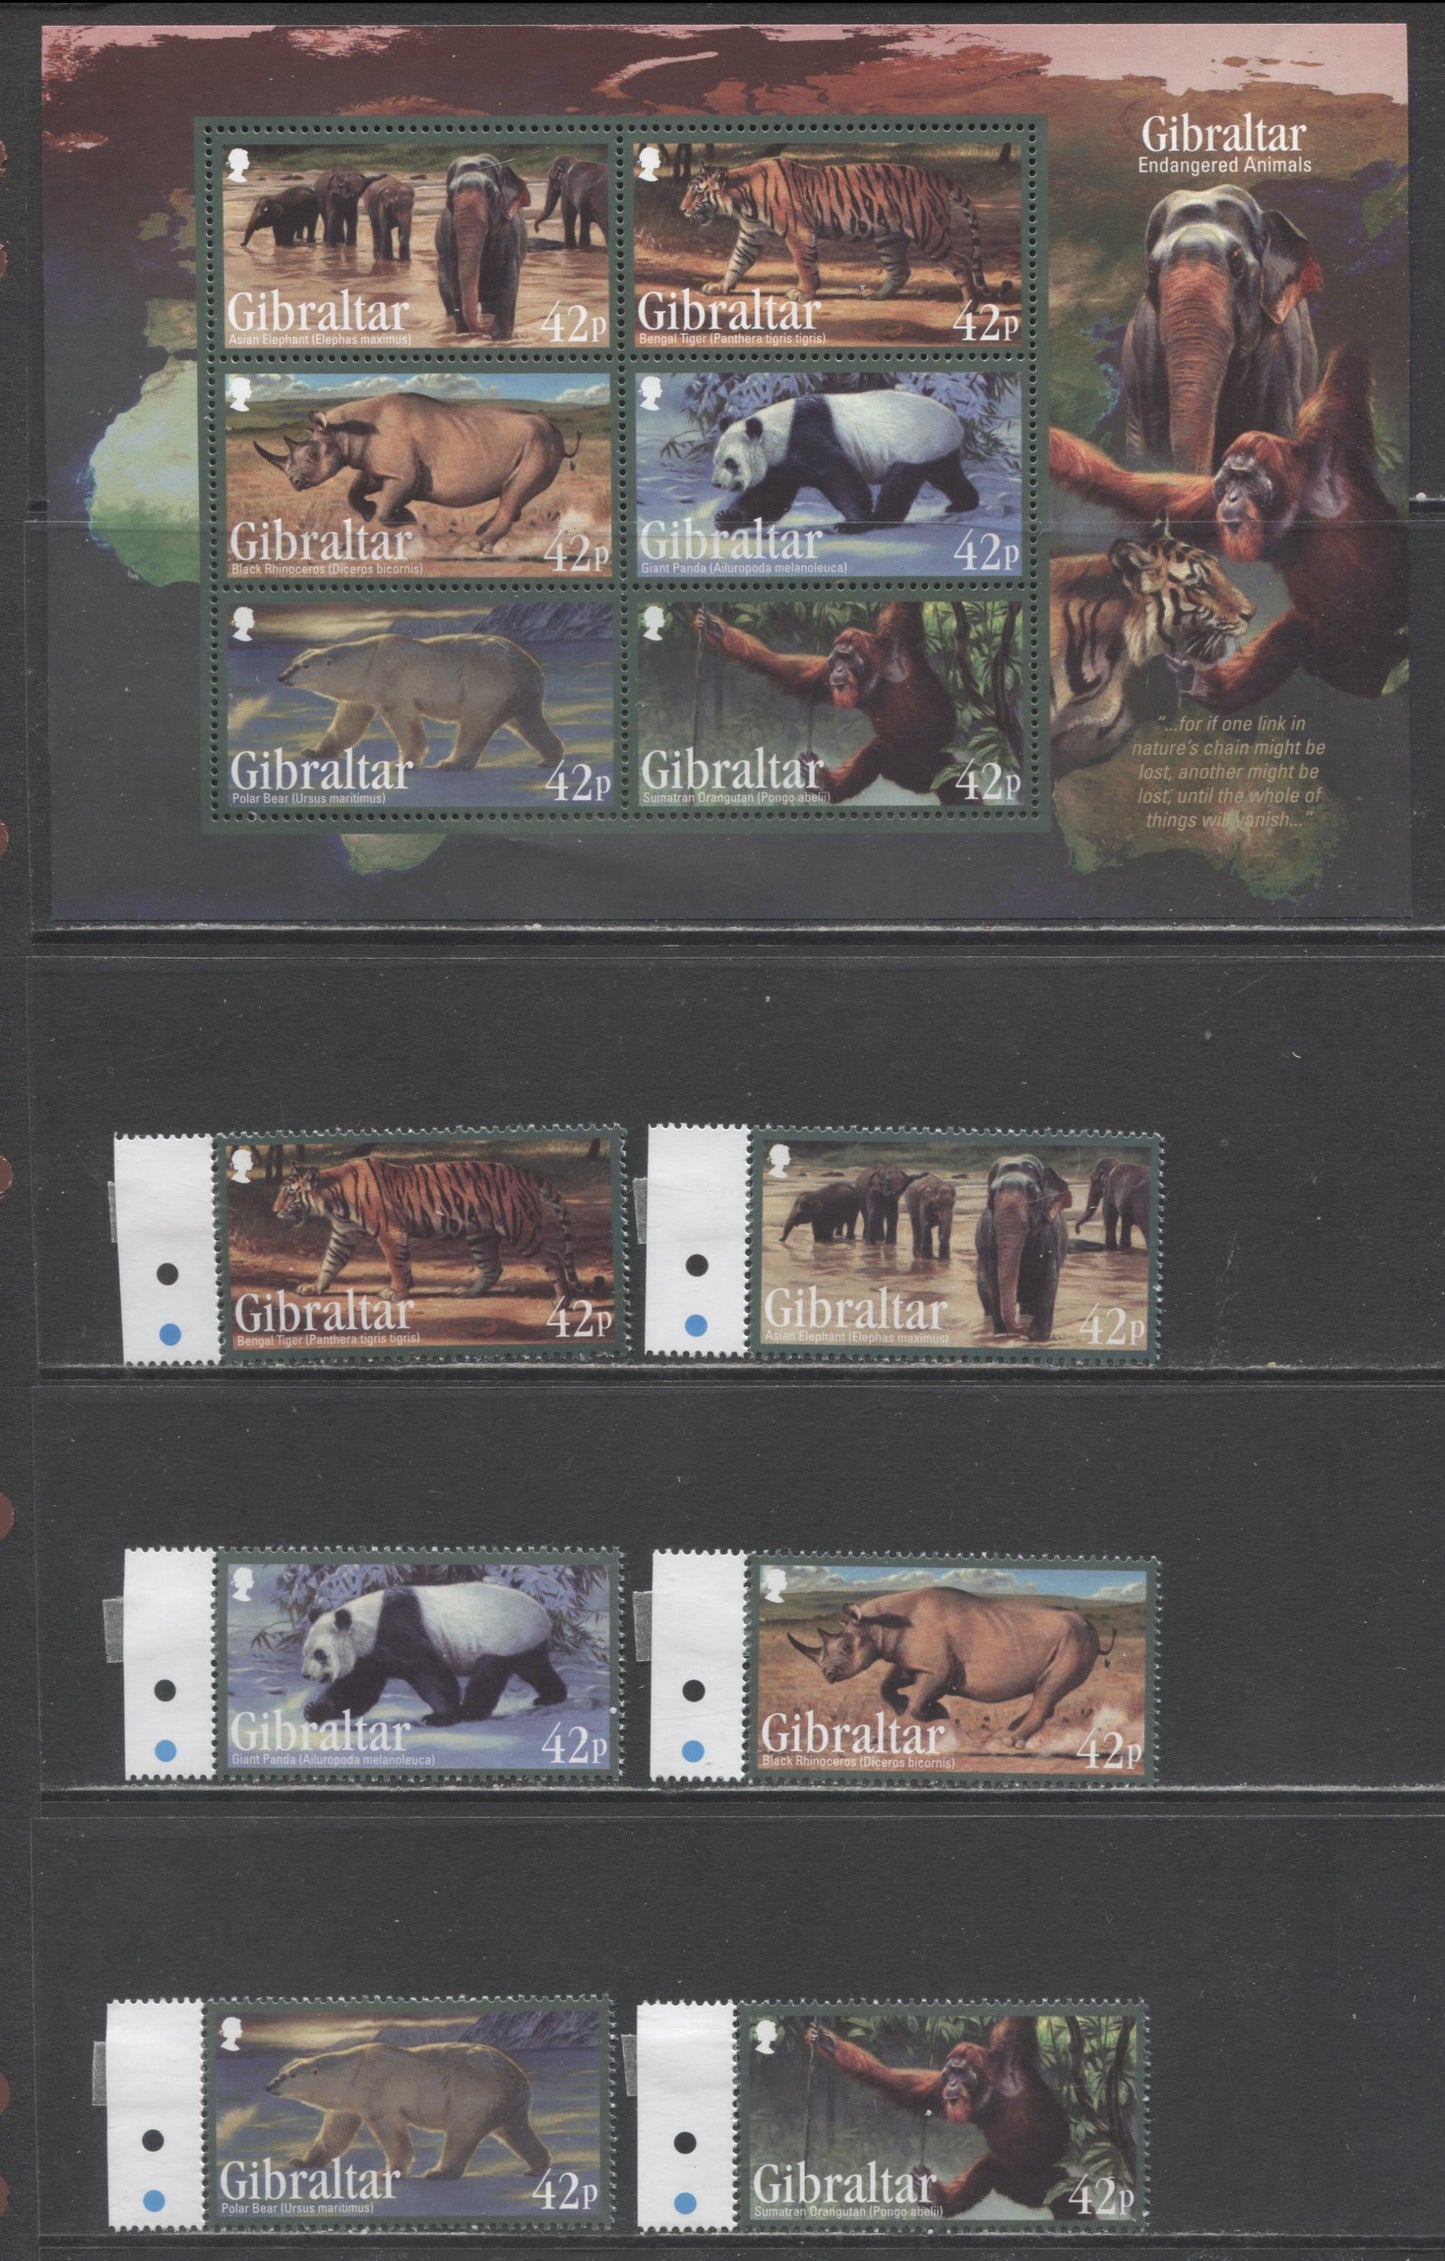 Lot 11 Gibraltar SC#1284-1289a 2011 Wildlife Issue, 7 VFNH Singles & Souvenir Sheet, Click on Listing to See ALL Pictures, 2017 Scott Cat. $20